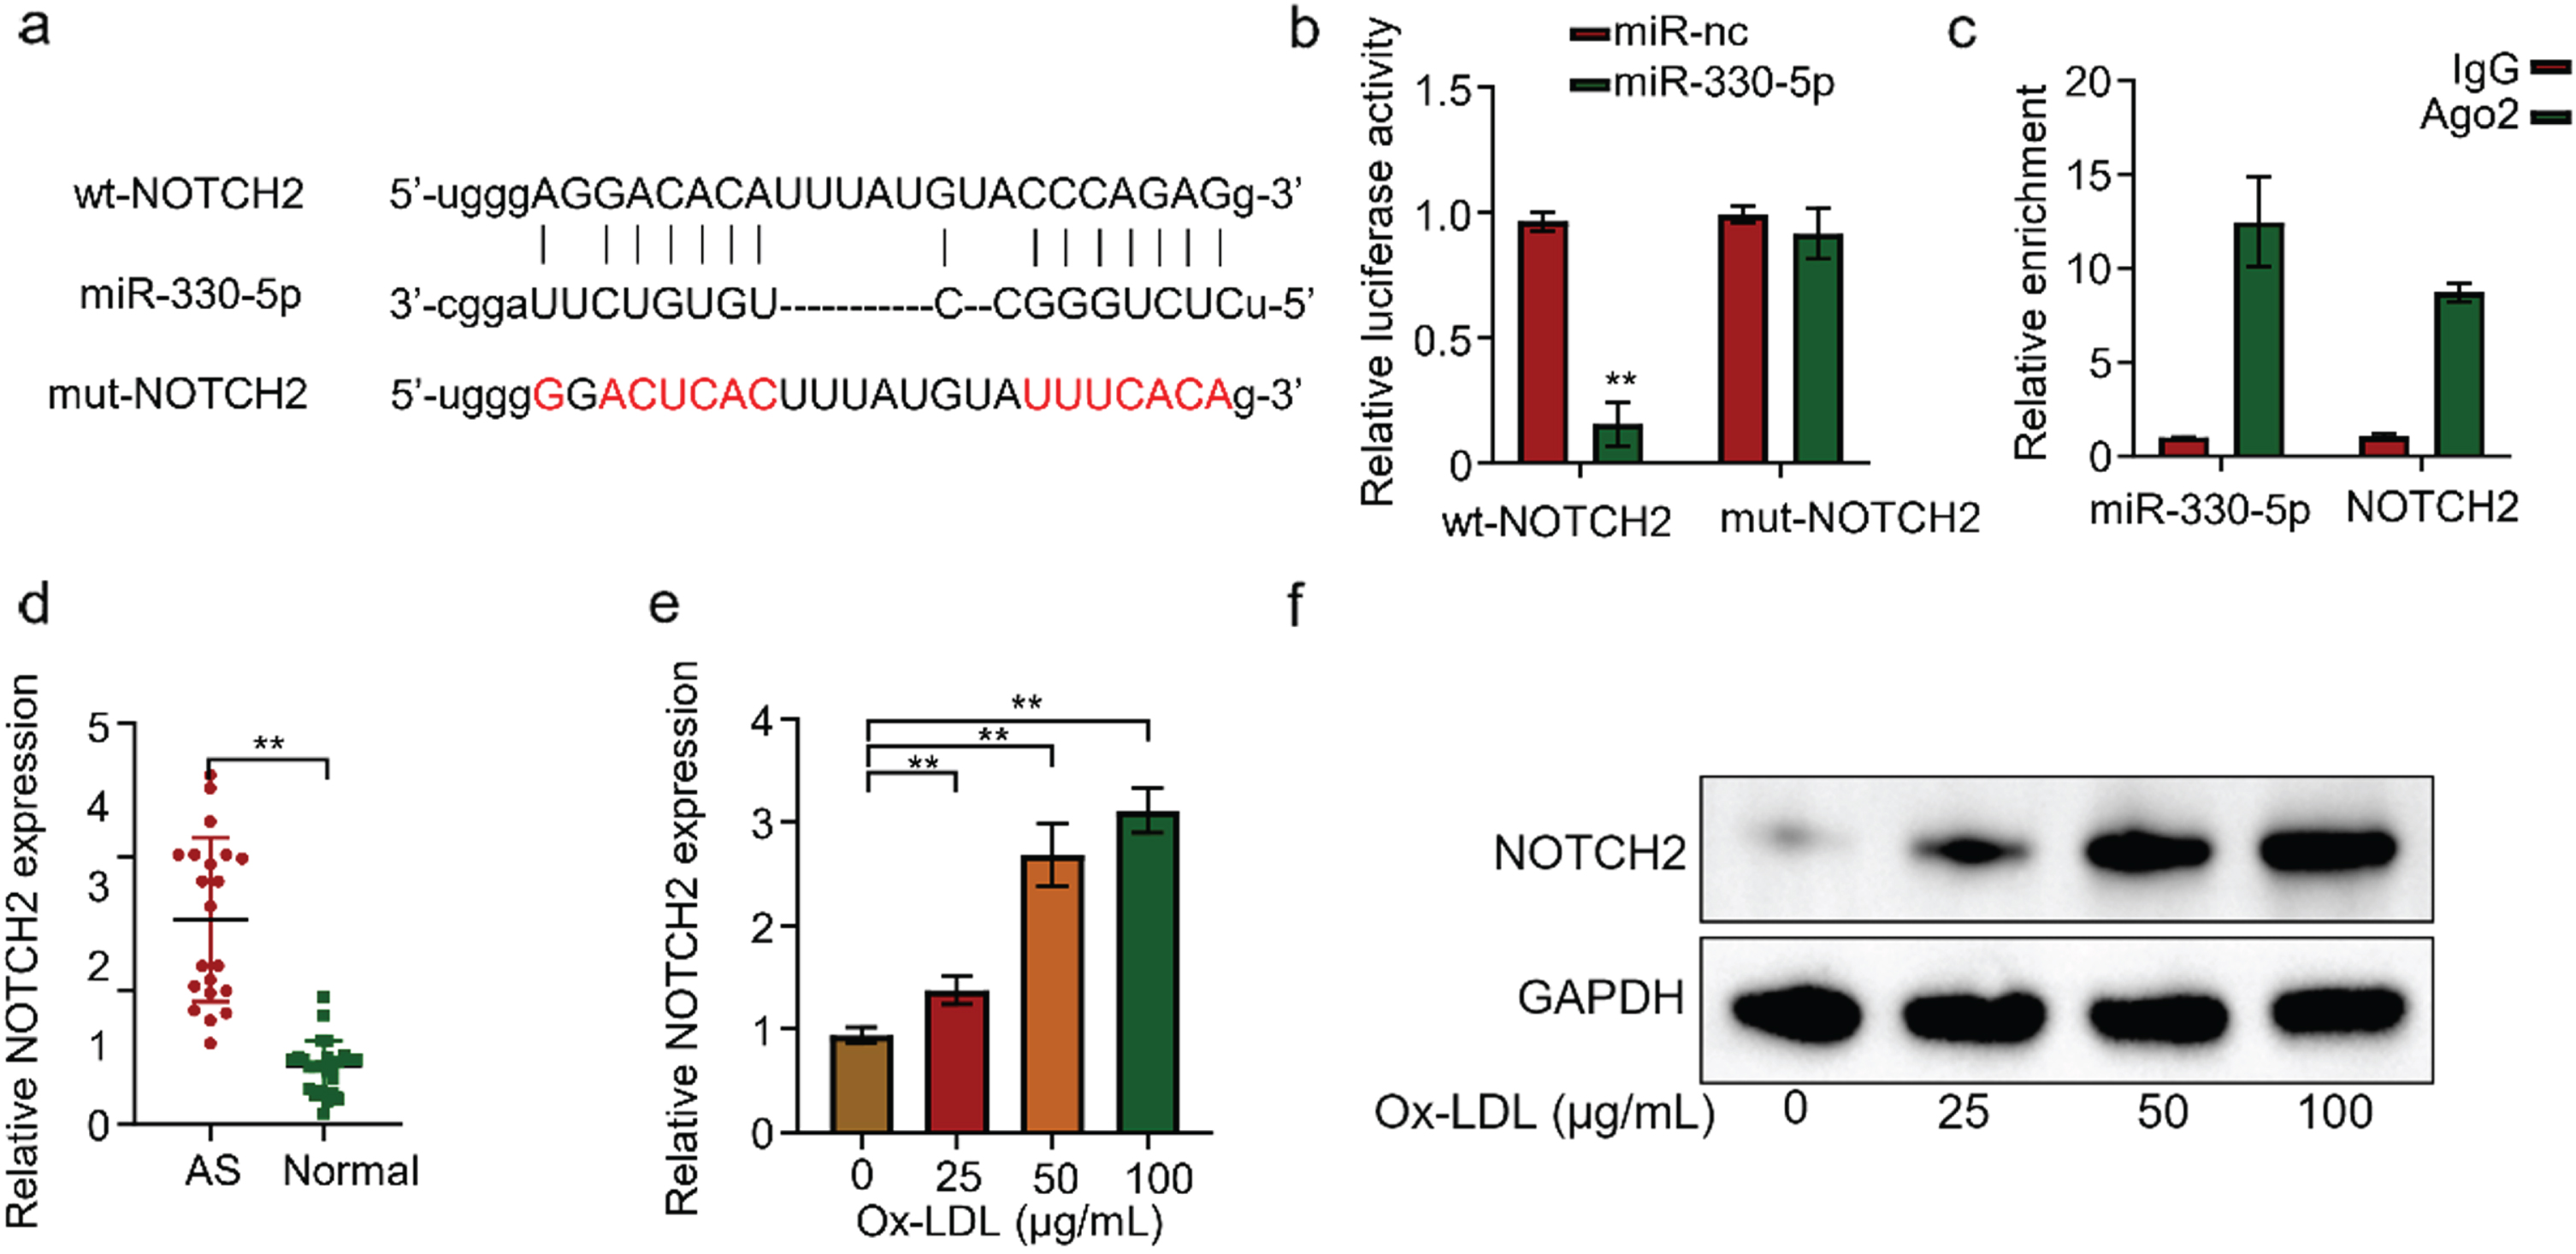 
NOTCH2 is a target gene of Micro-330-5p. (A) Starbase predicted NOTCH2 as a candidate gene targeted by Micro-330-5p. (B) Luciferase fluorescent reporter assay was performed to validate the binding of Micro-330-5p tothe 3’-UTR region of NOTCH2. (C) RIP-qRT-PCR experiments were conducted using Ago2 antibodies in HUVECS cells. (D) qRT-PCR was used to detect NOTCH2 expression in the serum of AS and healthy controls. (E) qRT-PCR was used to detect NOTCH2 expression in cells of each group. (F) Western blot was performed to assess NOTCH2 expression in each group of cells.